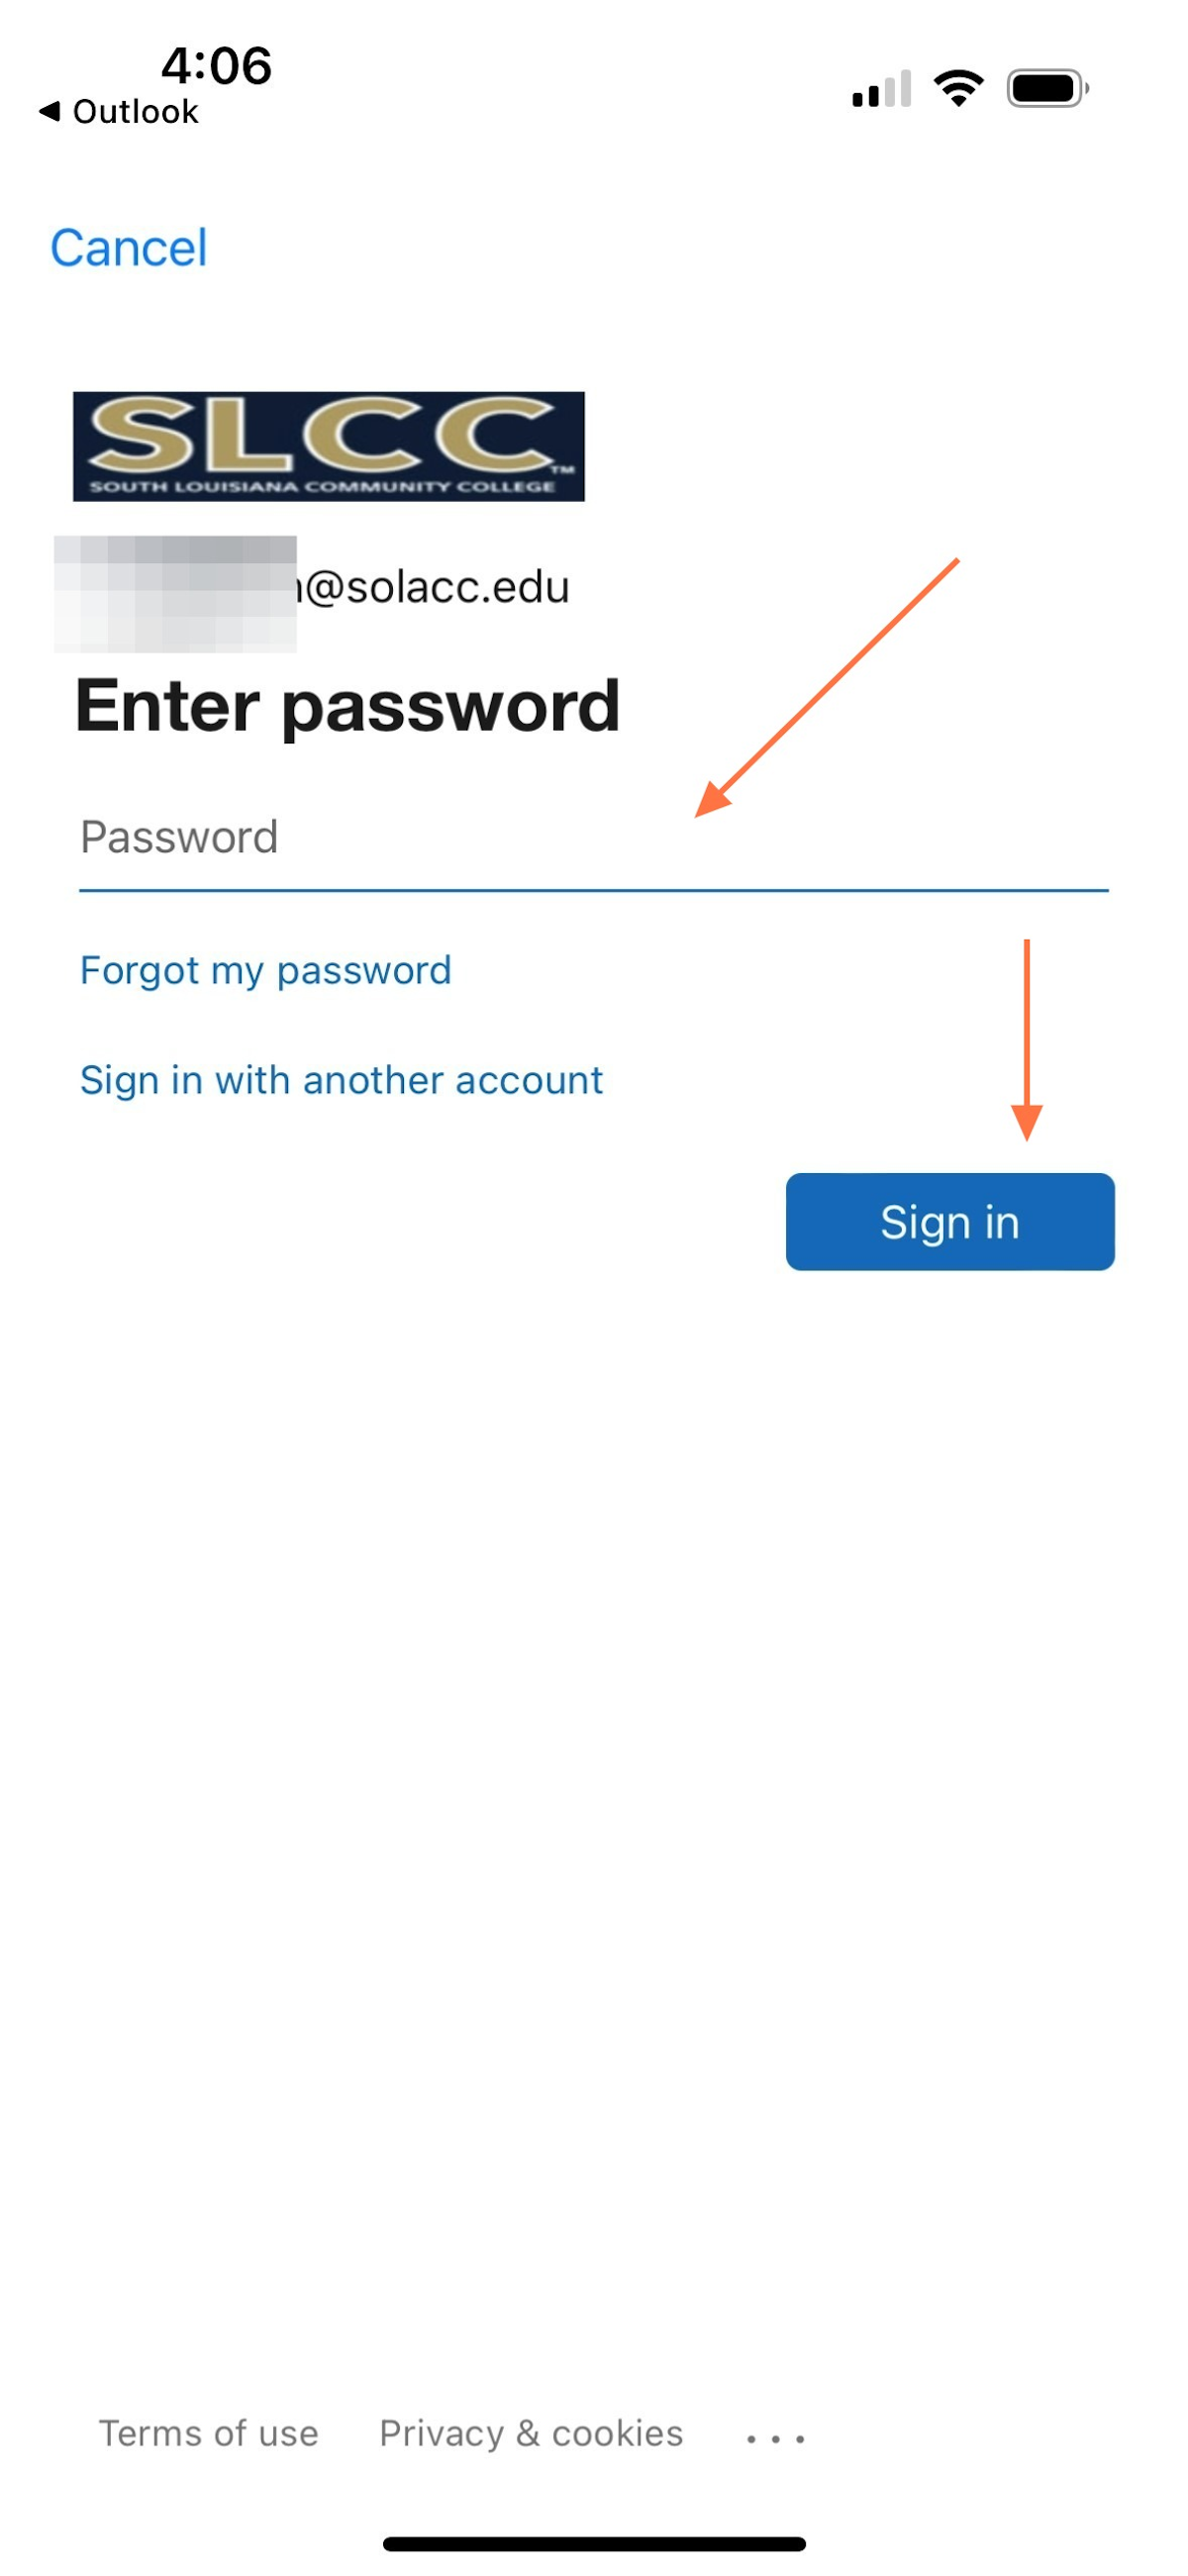 Here, you will put your login information and click sign in.